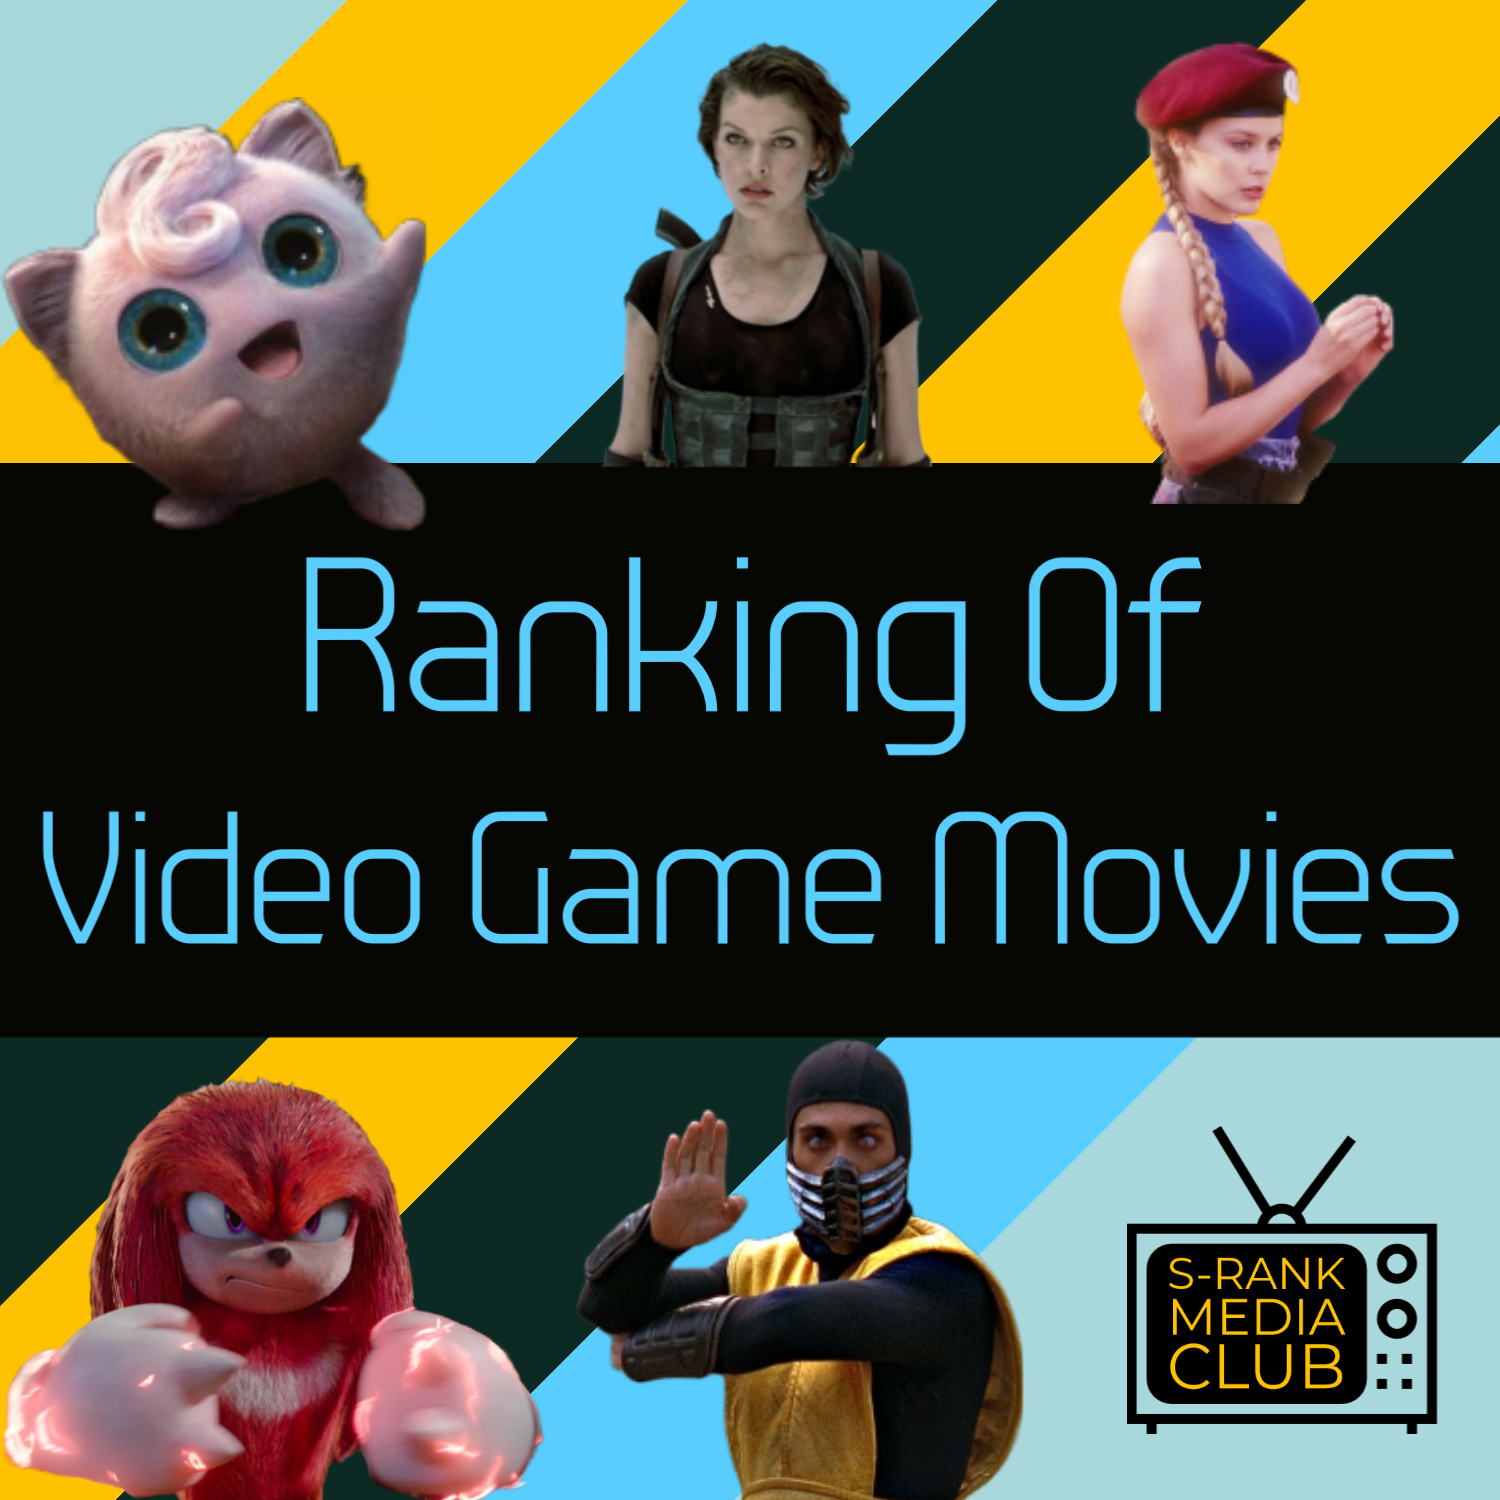 Artwork for podcast Ranking of Video Game Movies